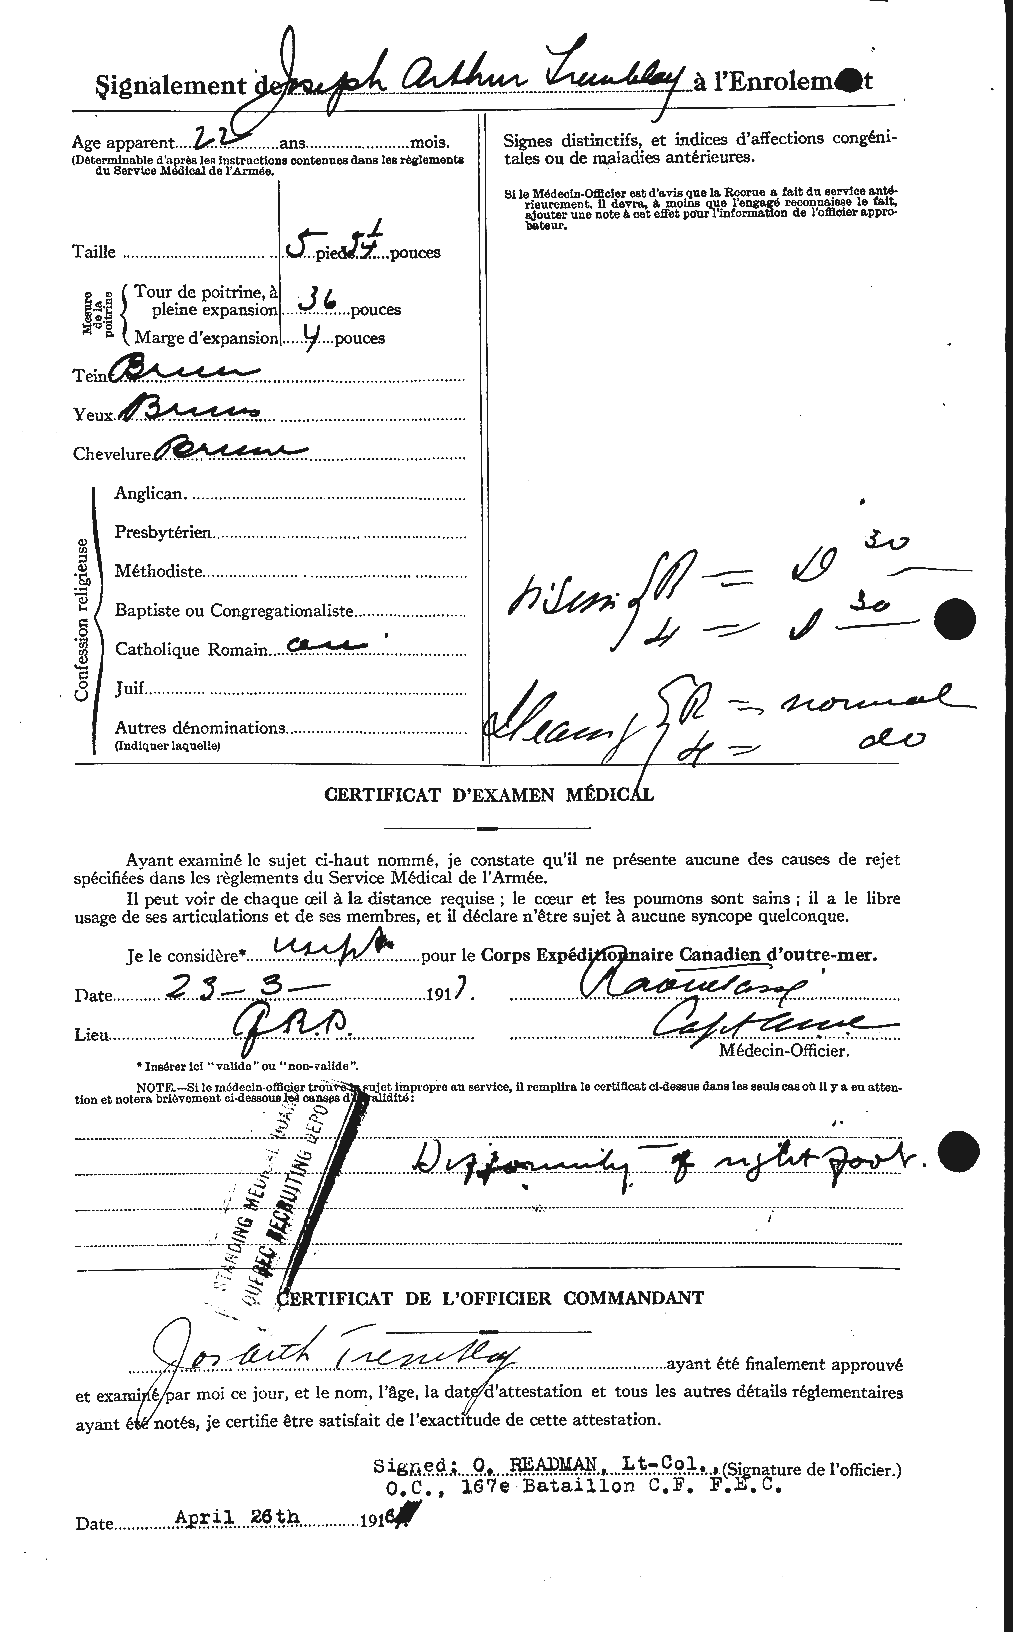 Personnel Records of the First World War - CEF 639129b